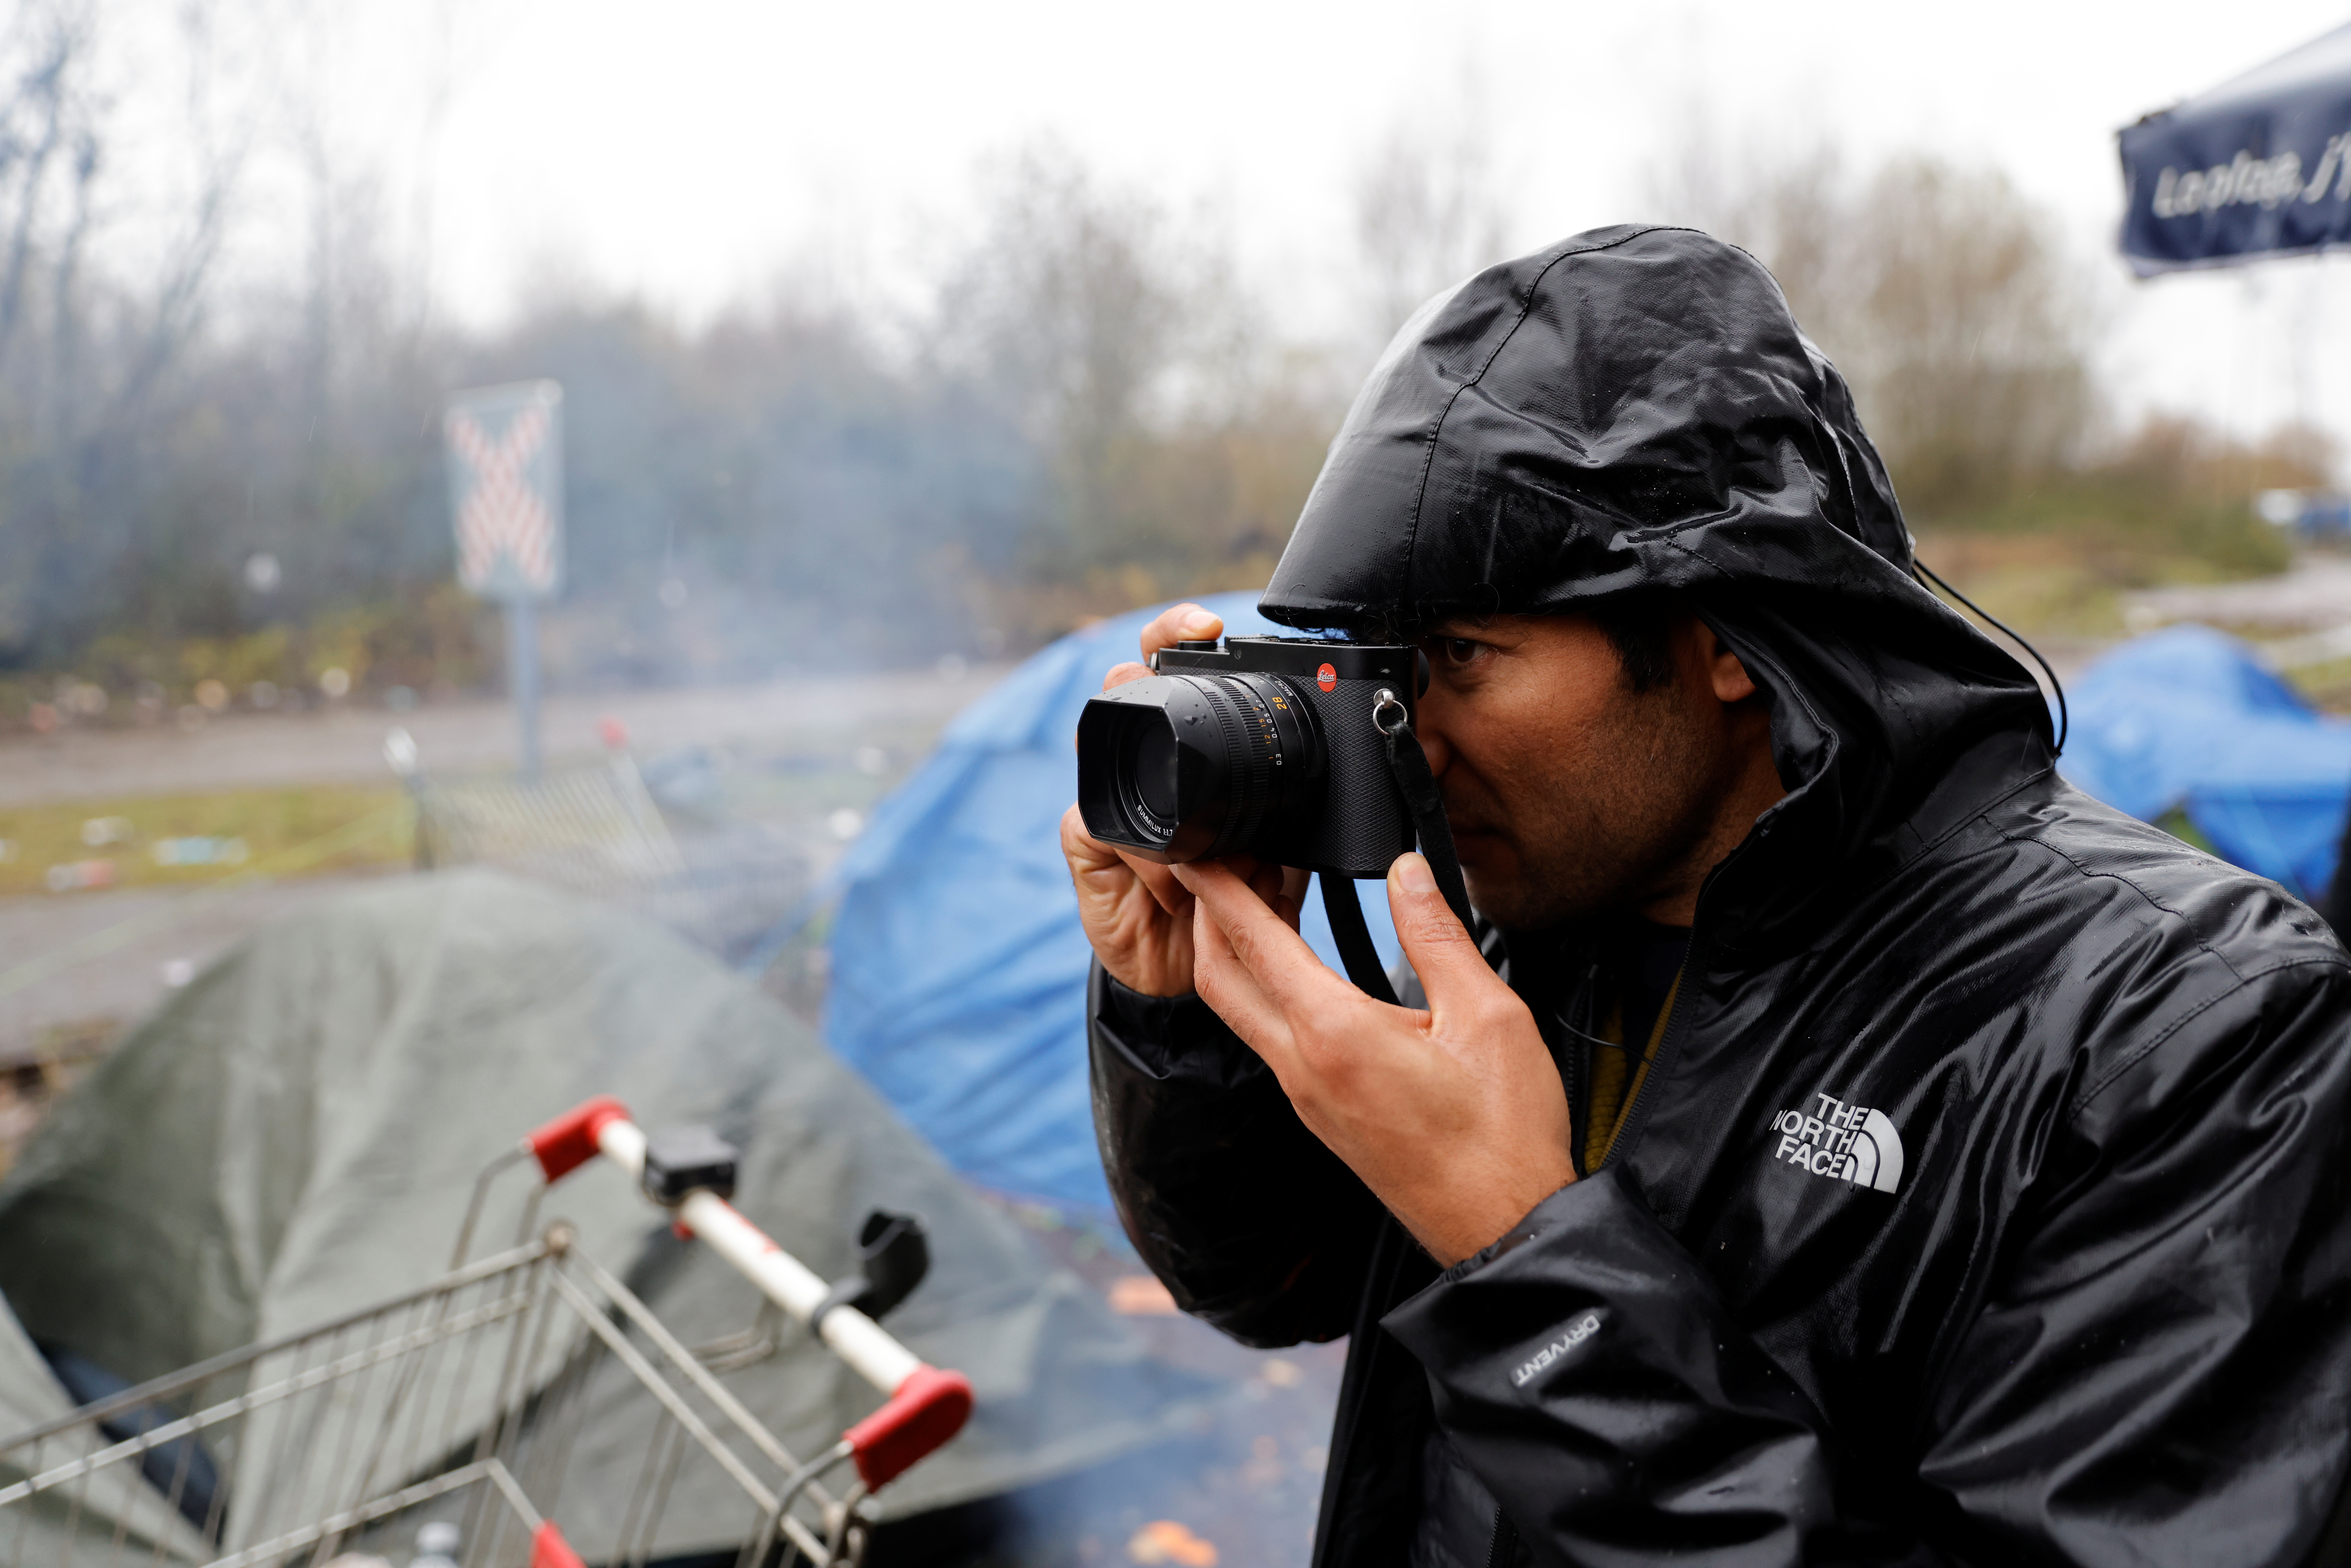 Afghan refugee and photographer Abdul Saboor takes pictures in a makeshifts migrant camp during an interview with Reuters in Loon-Plage, near Dunkirk, France, December 4, 2021. REUTERS/Pascal Rossignol